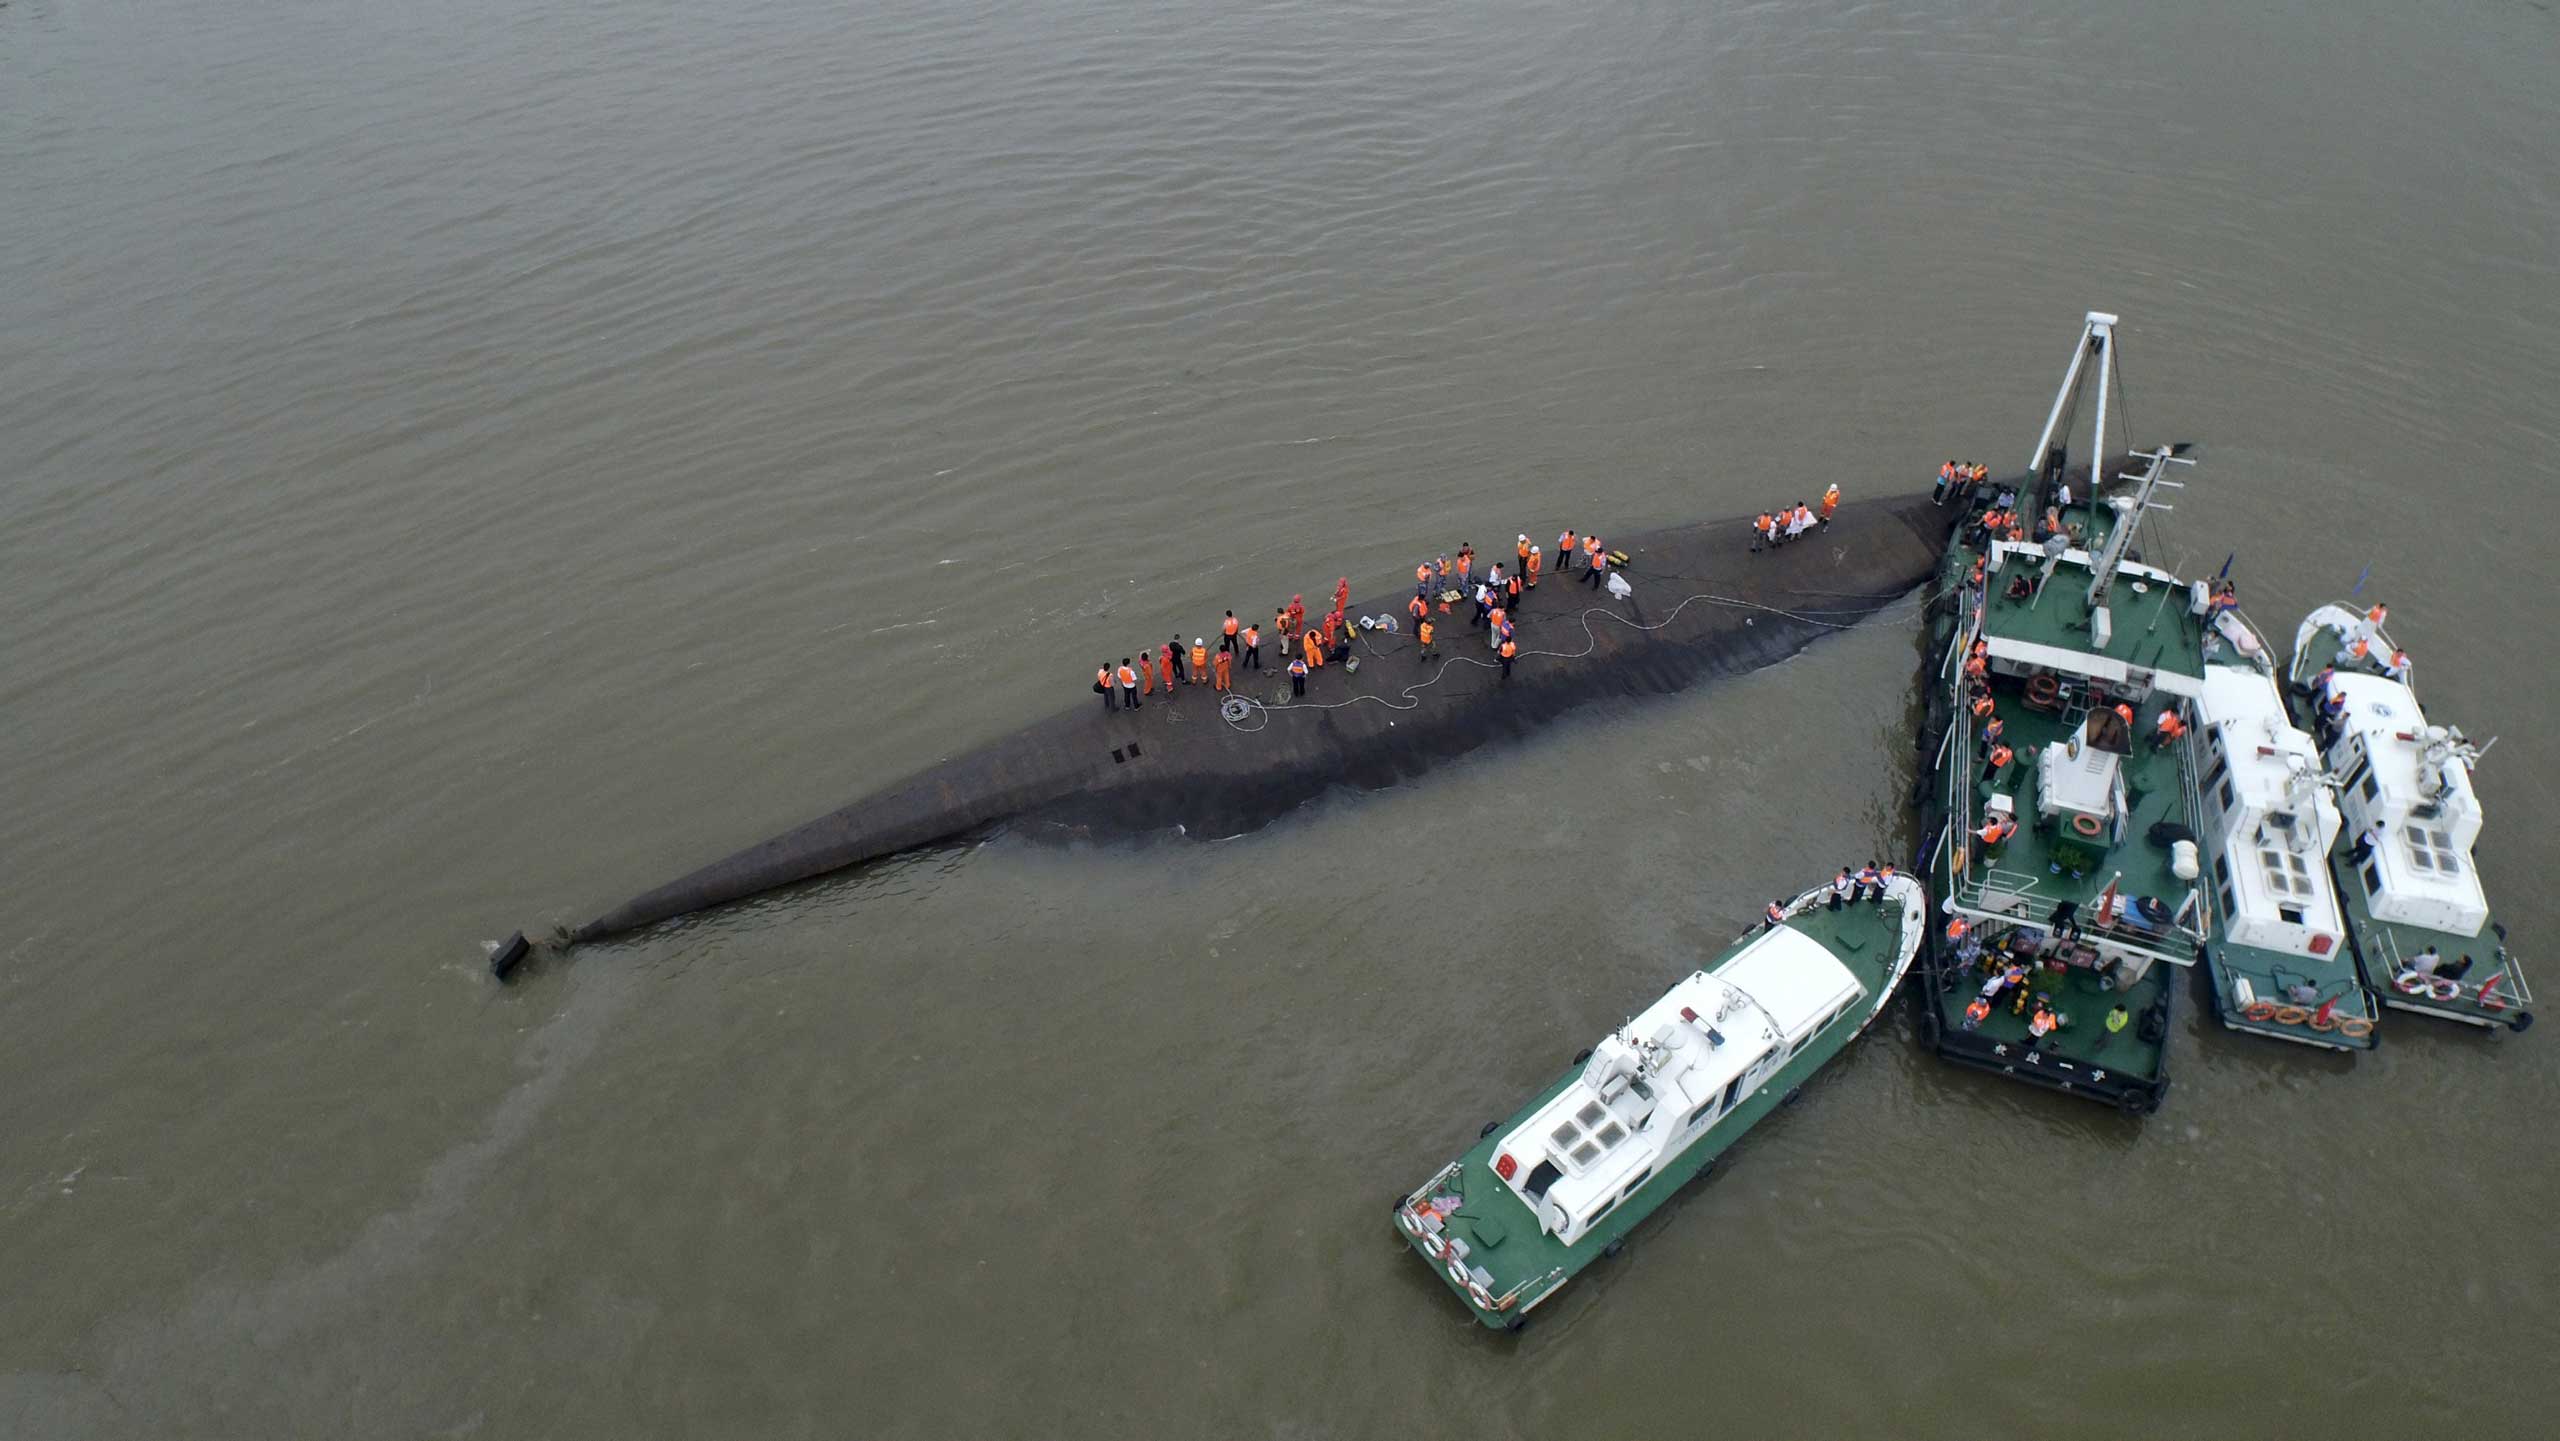 An aerial view shows rescue workers searching on the sunken ship at Jianli section of Yangtze River, Hubei province, China on June 2, 2015.